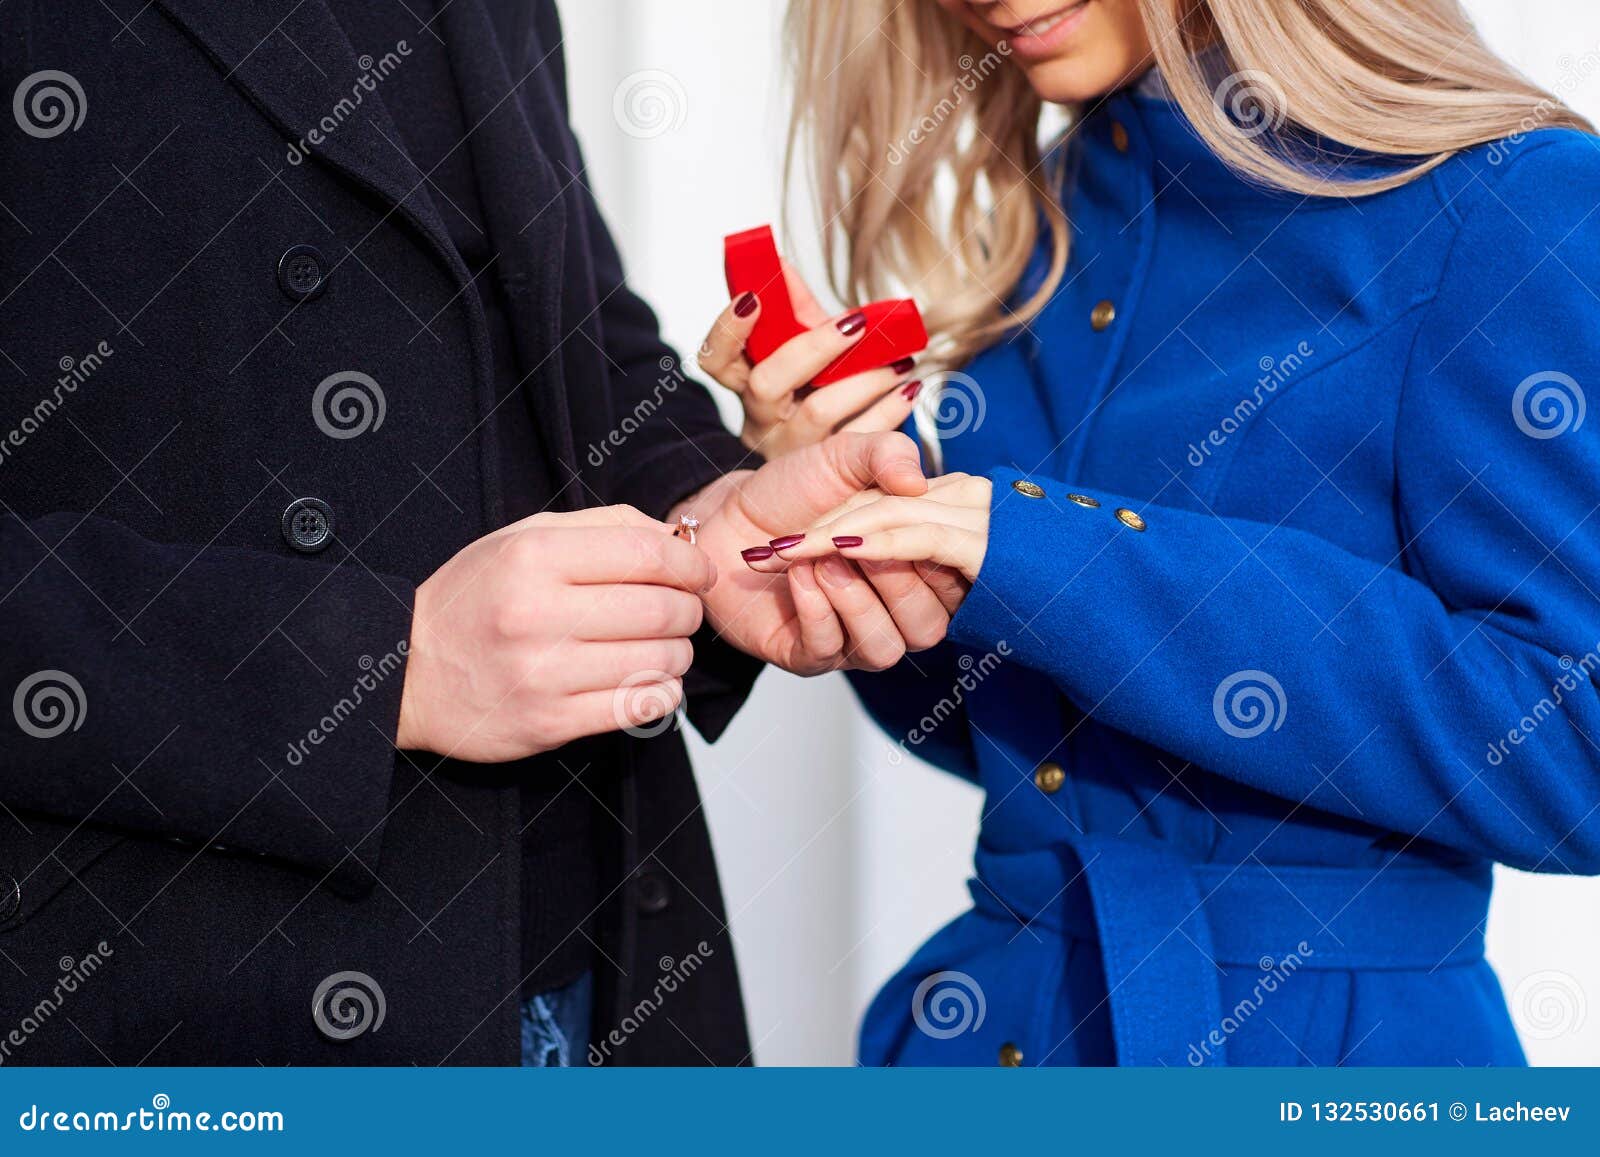 https://thumbs.dreamstime.com/z/propose-marriage-propose-marriage-men-makes-marriage-proposal-to-his-girlfriend-outdoors-132530661.jpg